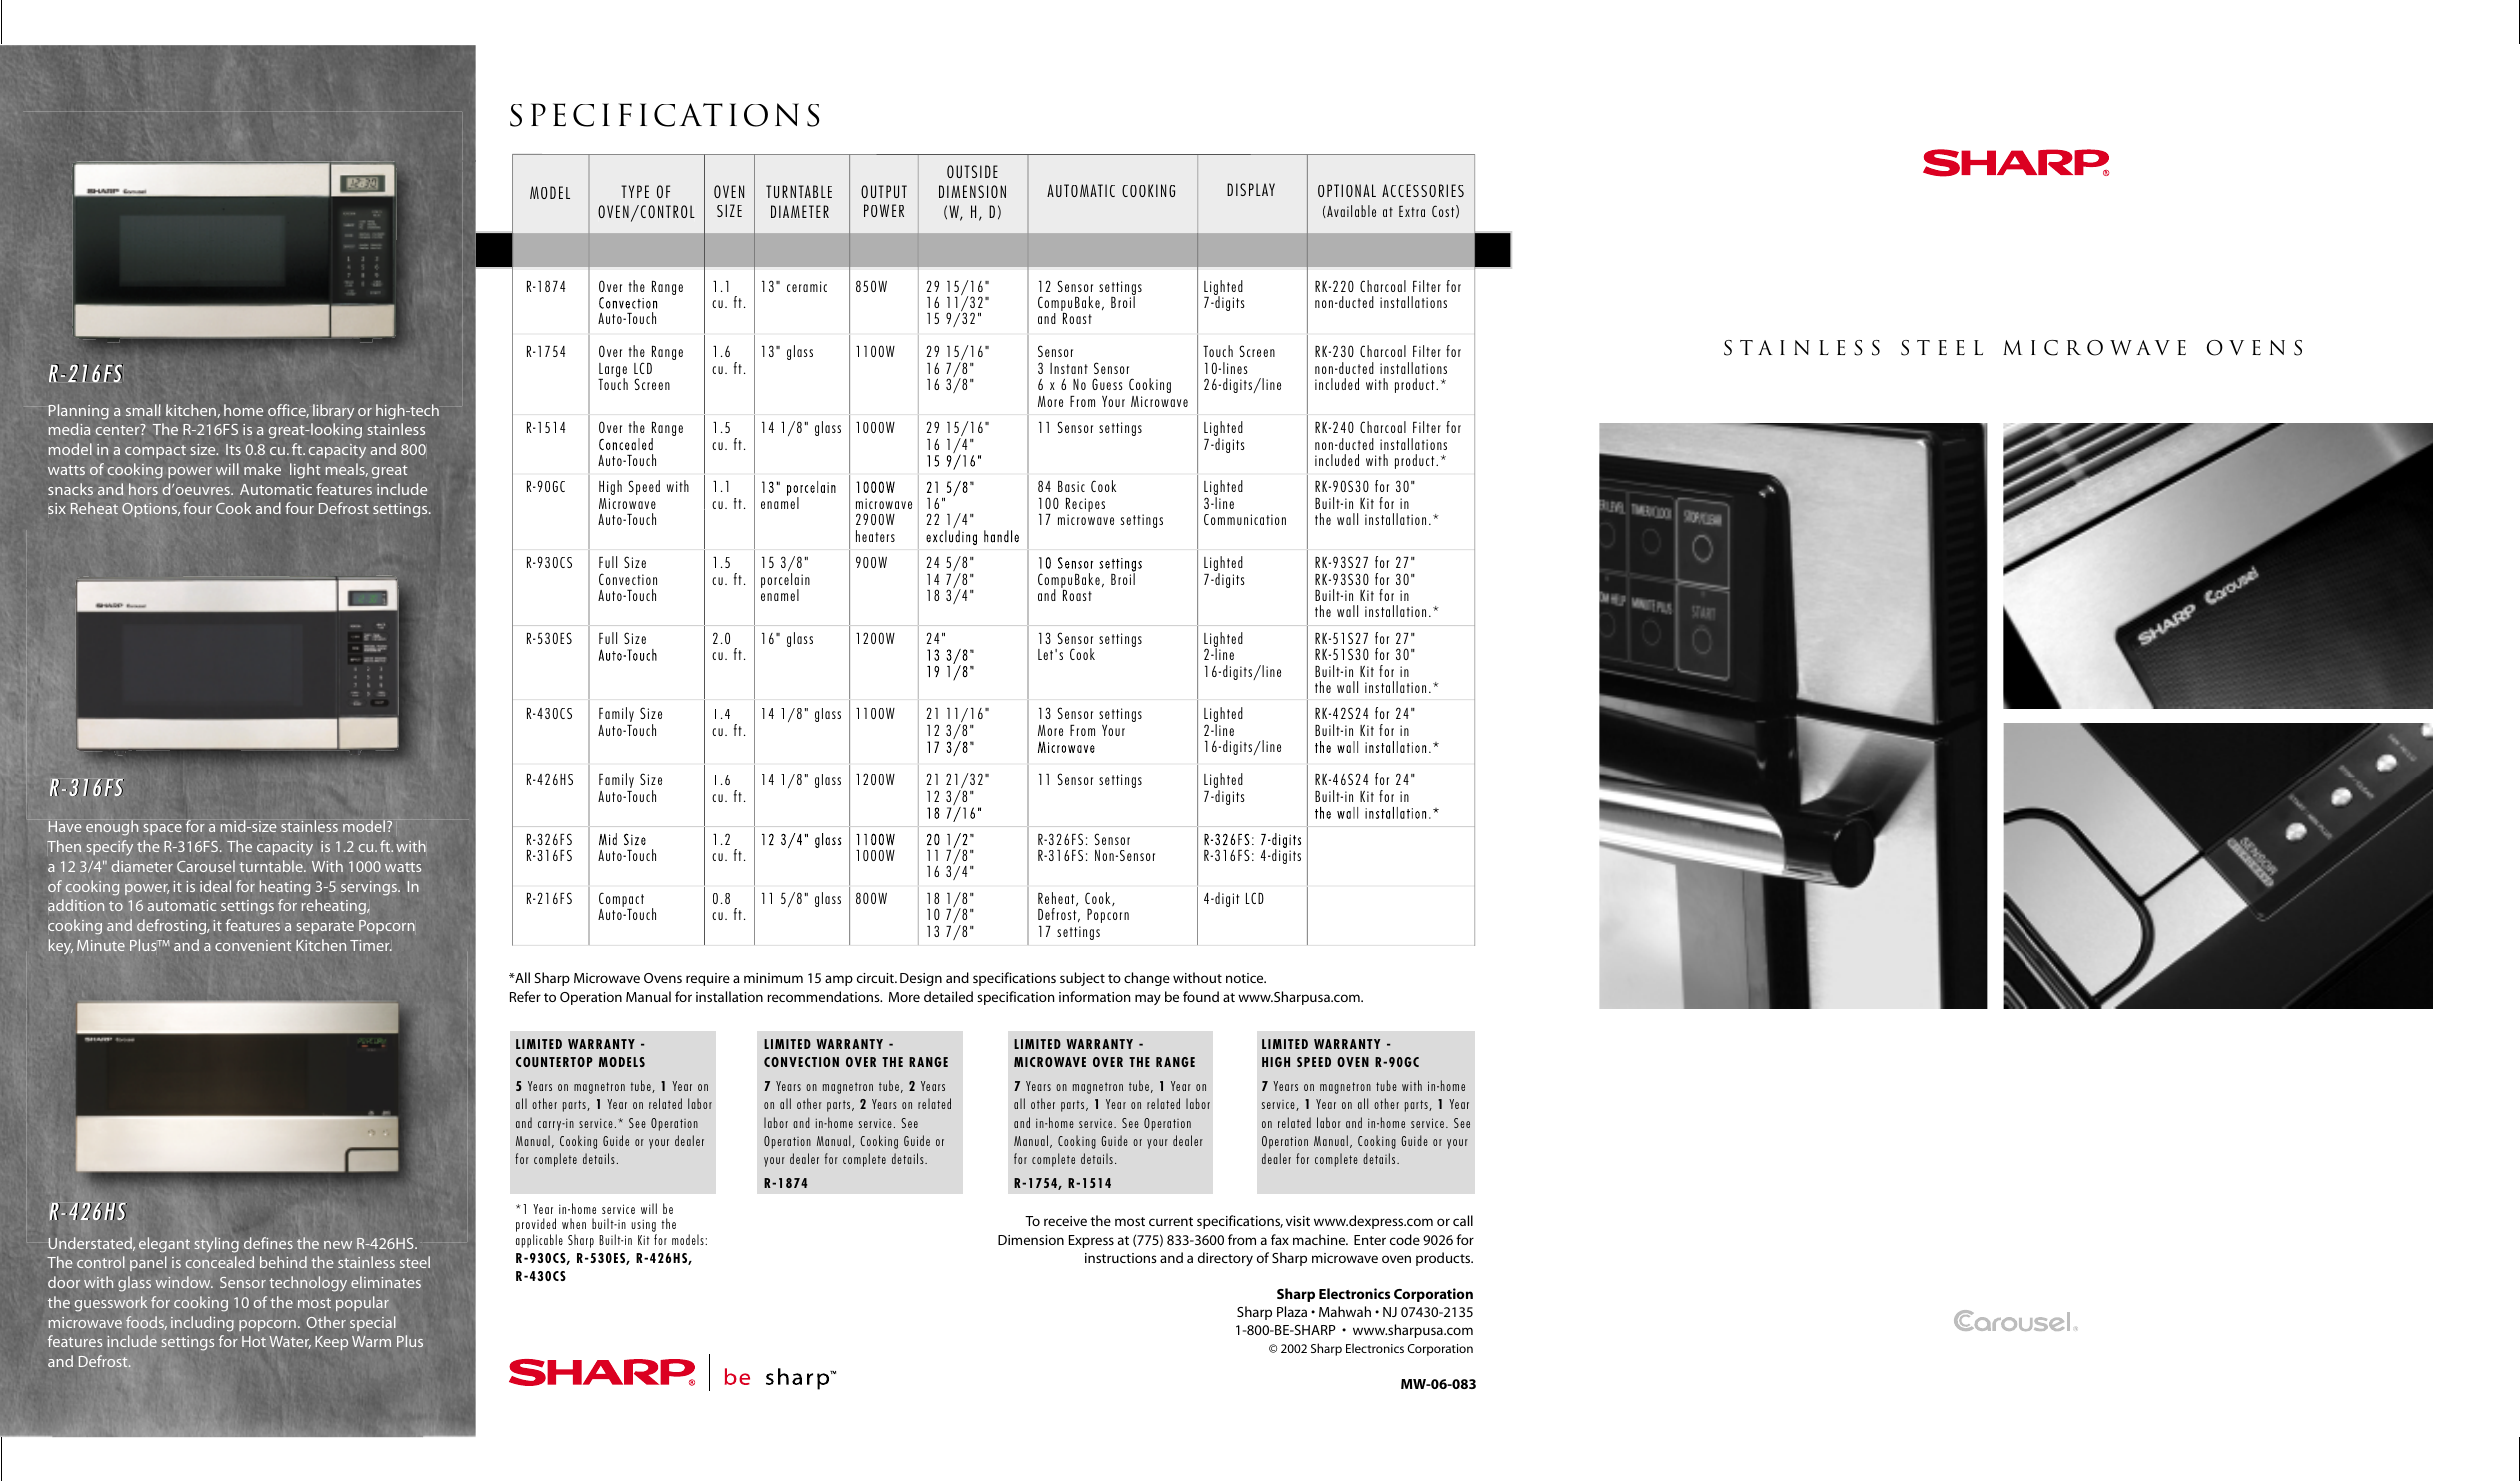 Page 1 of 5 - Sharp Sharp-Stainless-Steel-Microwave-Oven-Users-Manual- Stainless Steel Microwave Oven Brochure  Sharp-stainless-steel-microwave-oven-users-manual